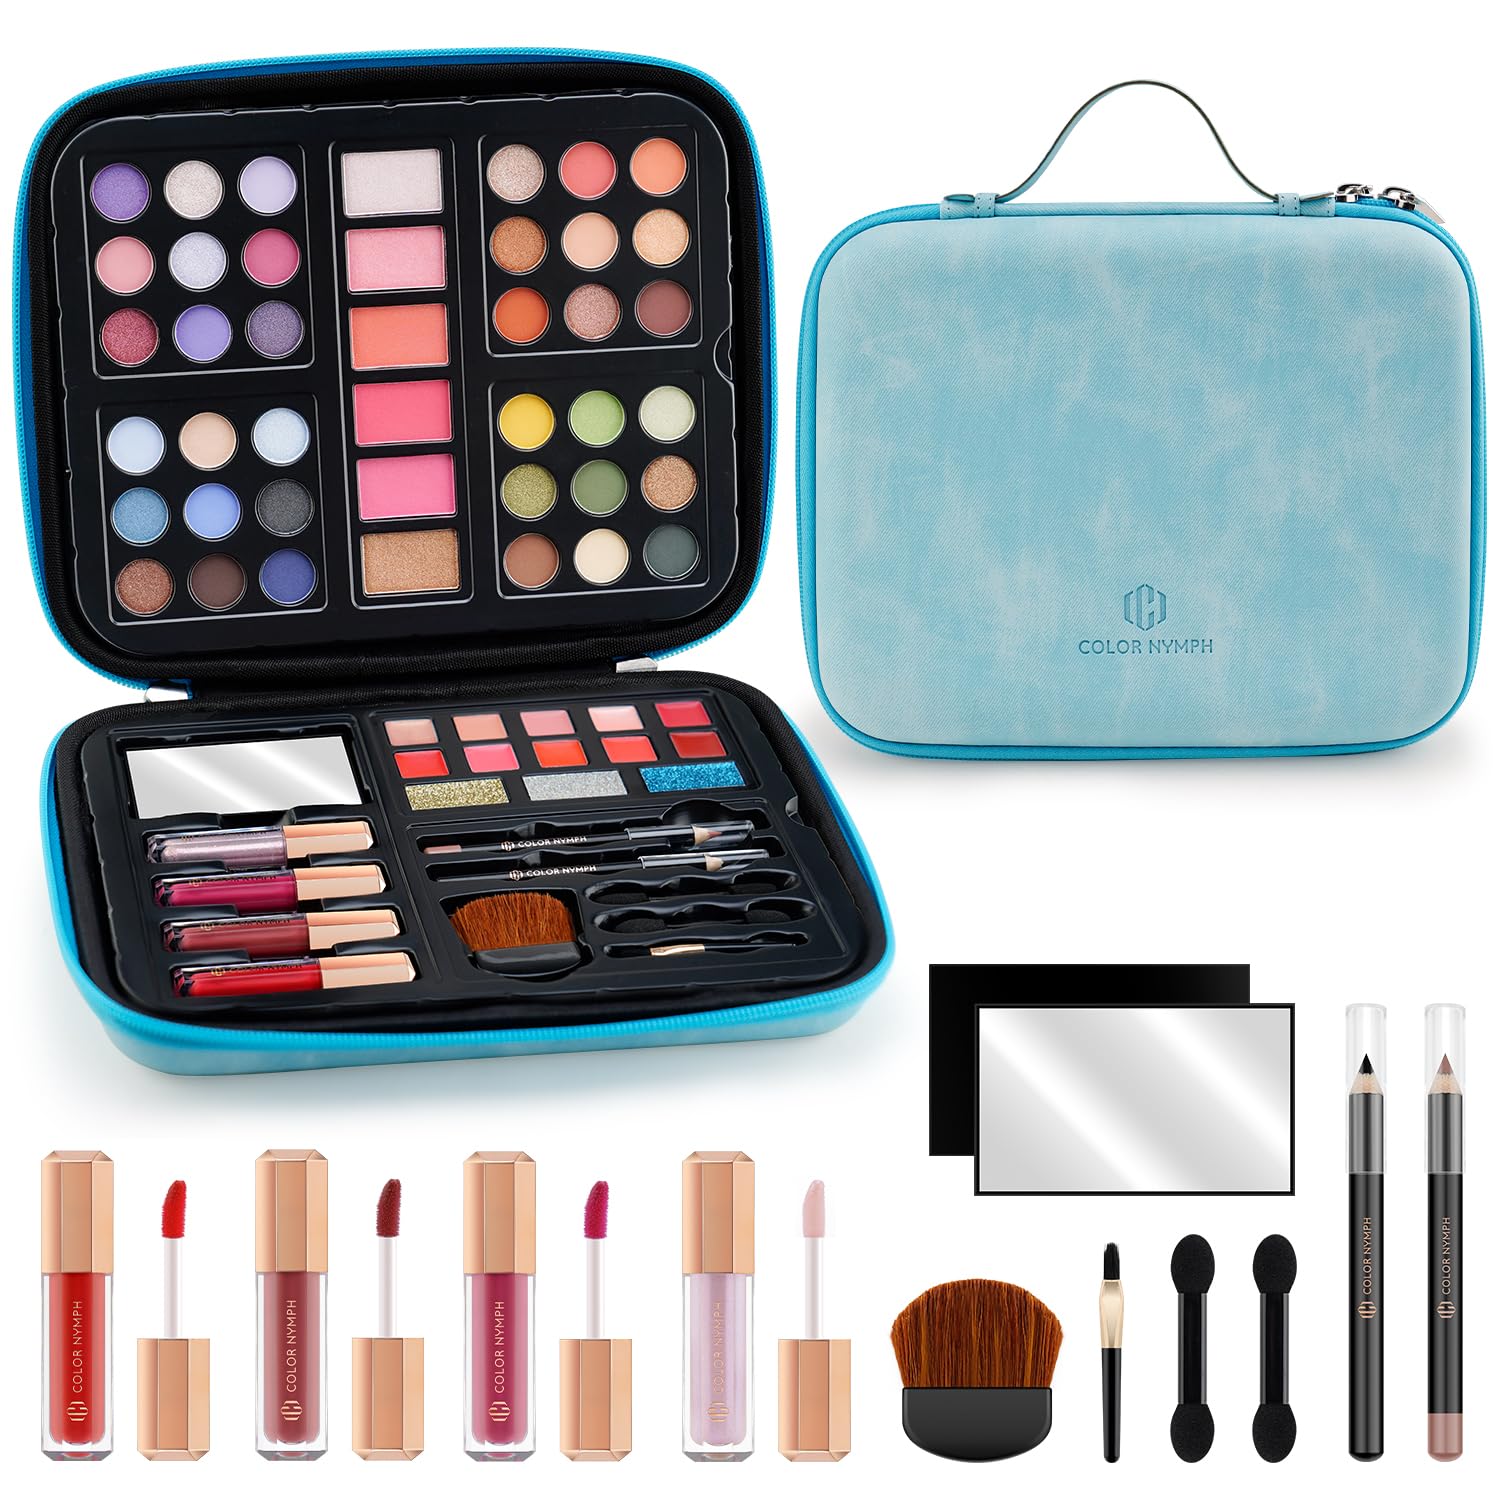 Beginner Makeup Kits for Teens with Reusable Handbag Including 36 Colors of Eyeshadow, 4 Colors of Lipgloss, and More